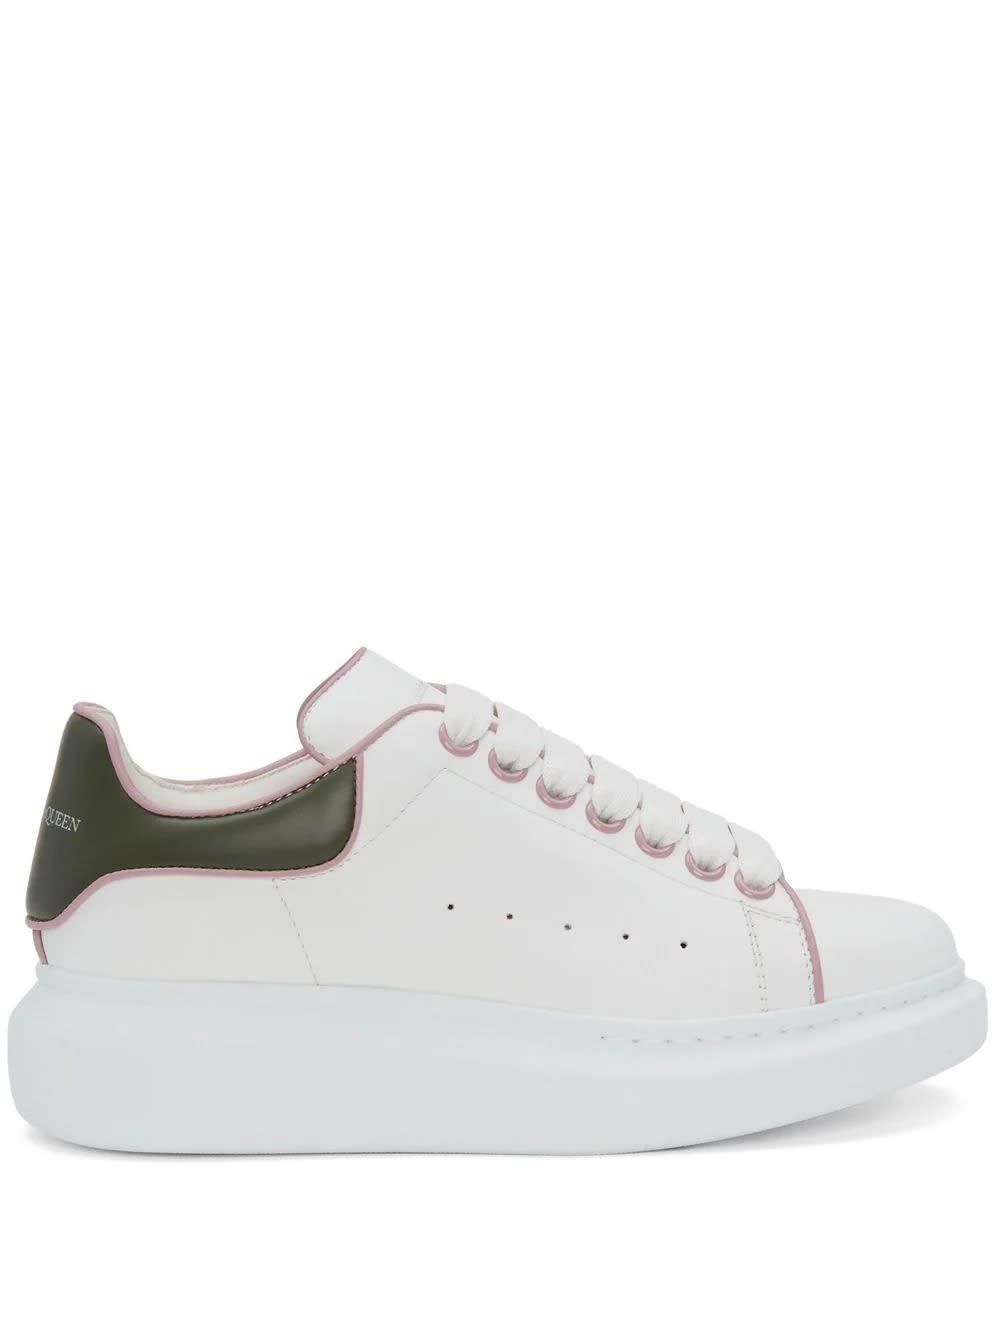 Alexander McQueen Oversize Sneakers With Contrast Stitching in White | Lyst